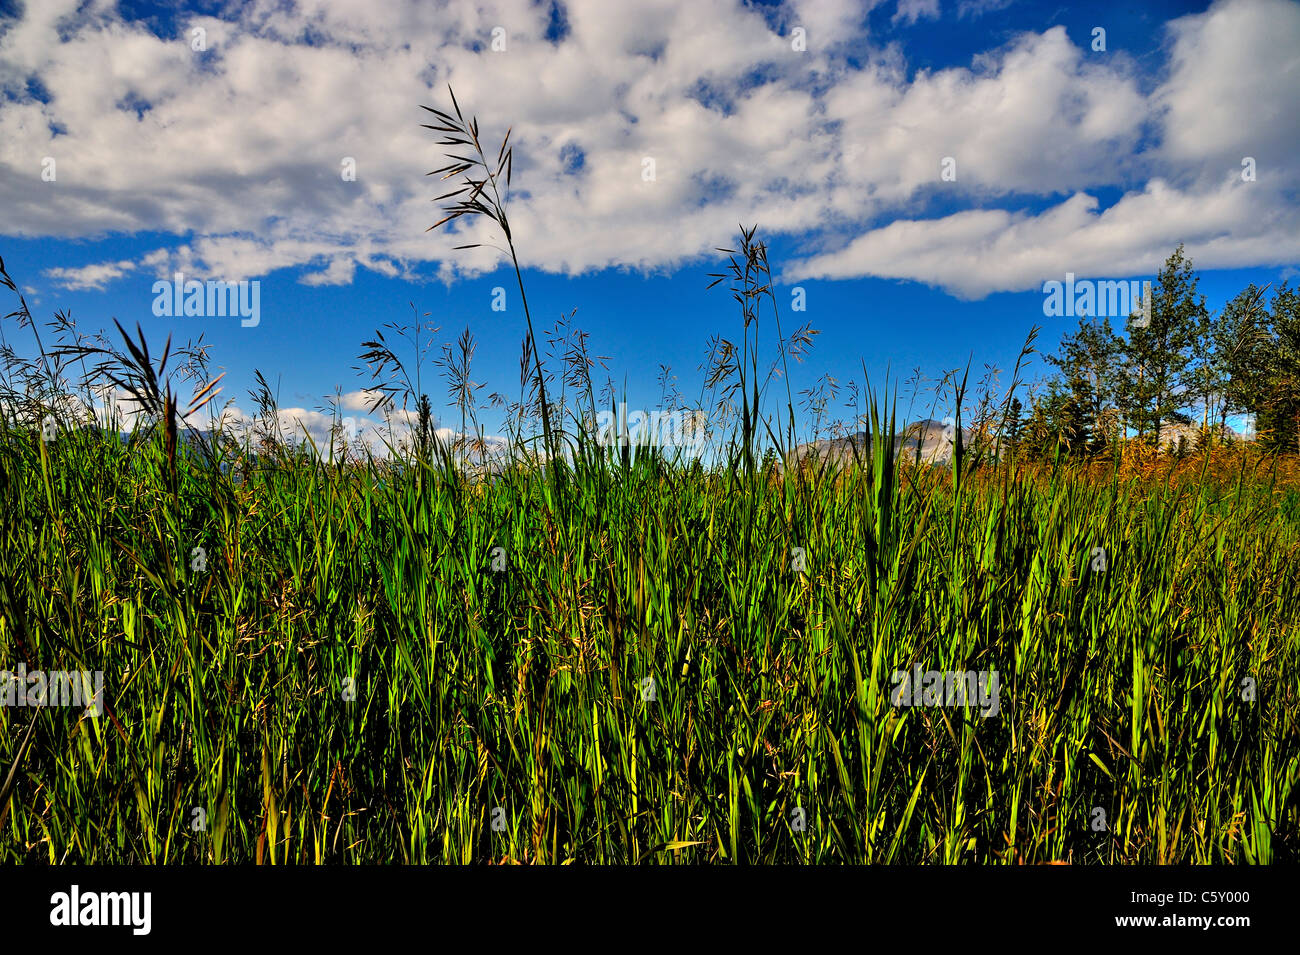 Wild grass growing tall in its environment Stock Photo